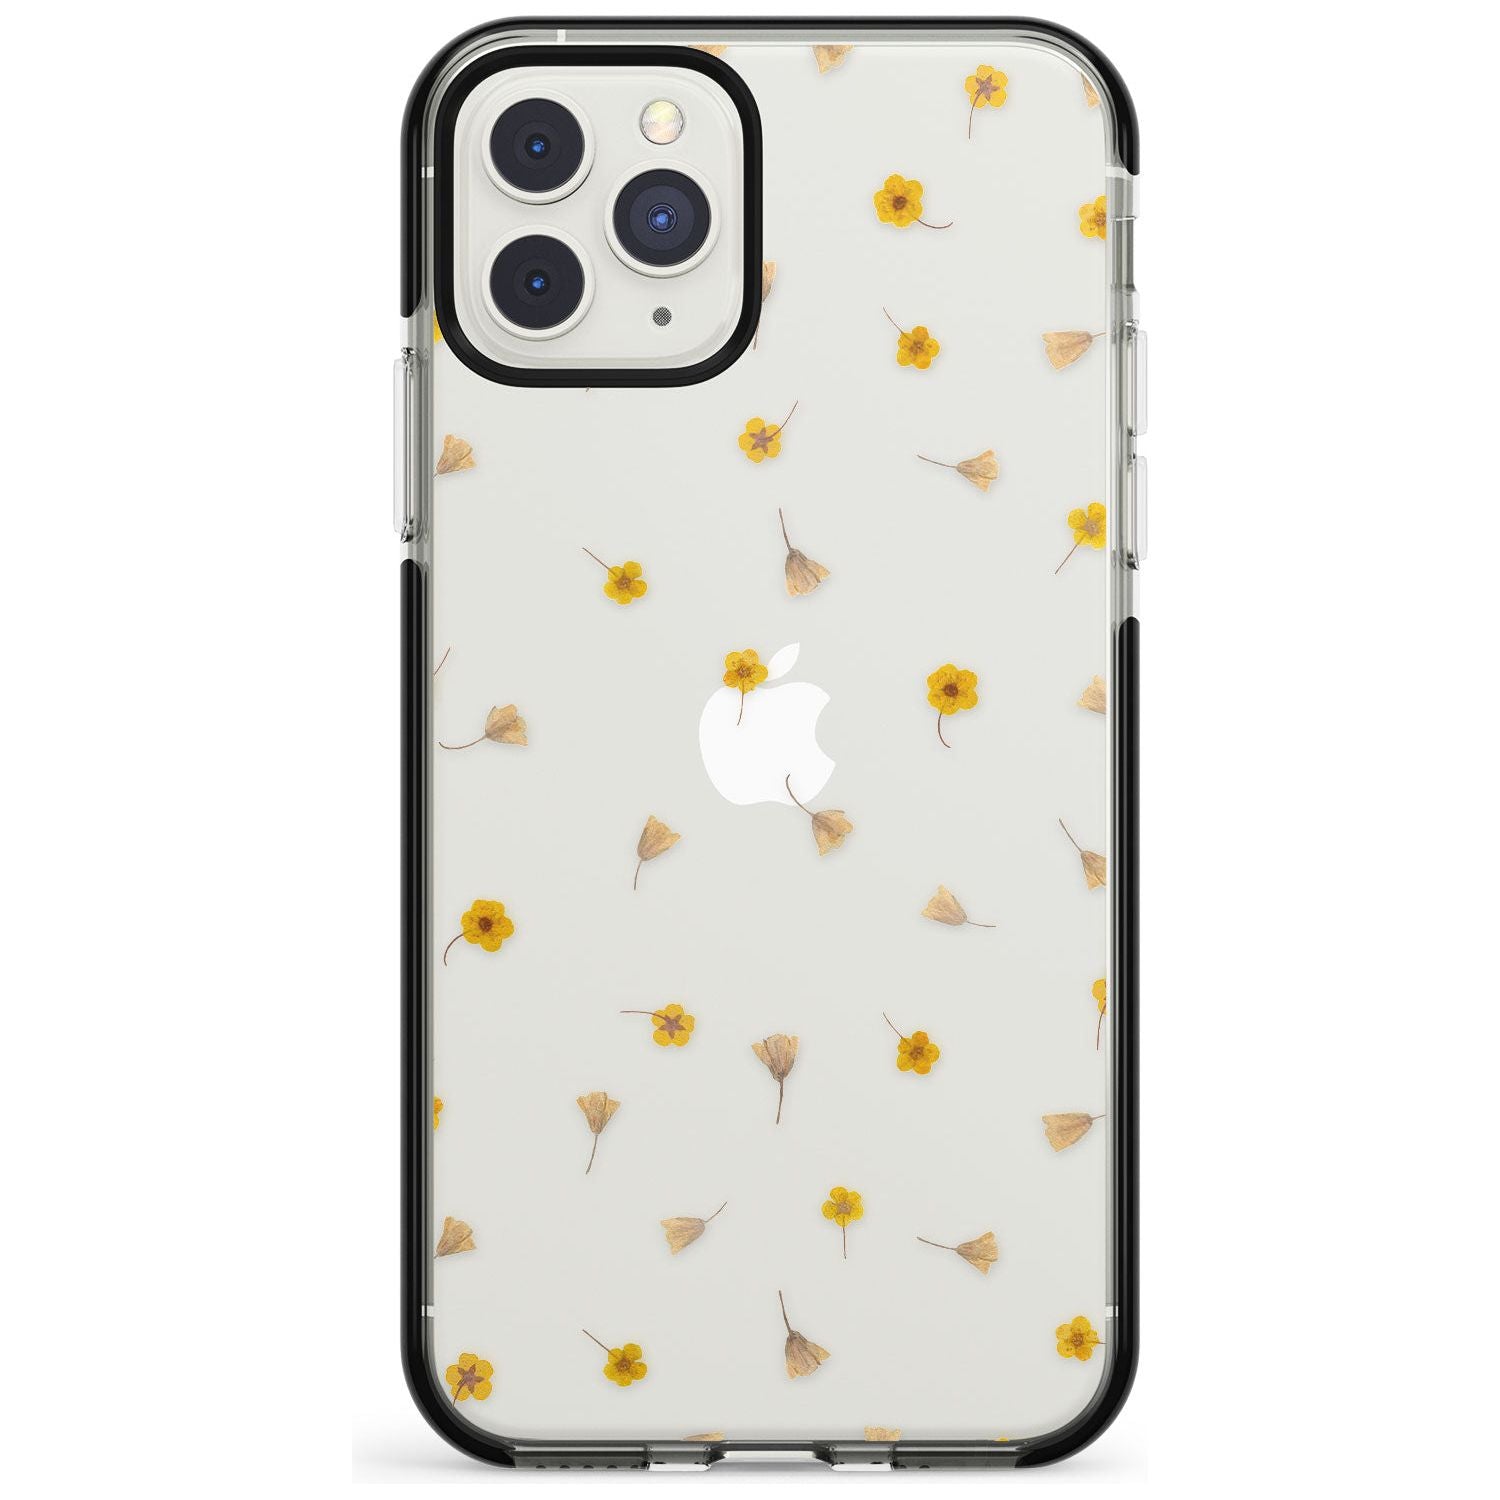 Small Flower Mix - Dried Flower-Inspired Design Black Impact Phone Case for iPhone 11 Pro Max